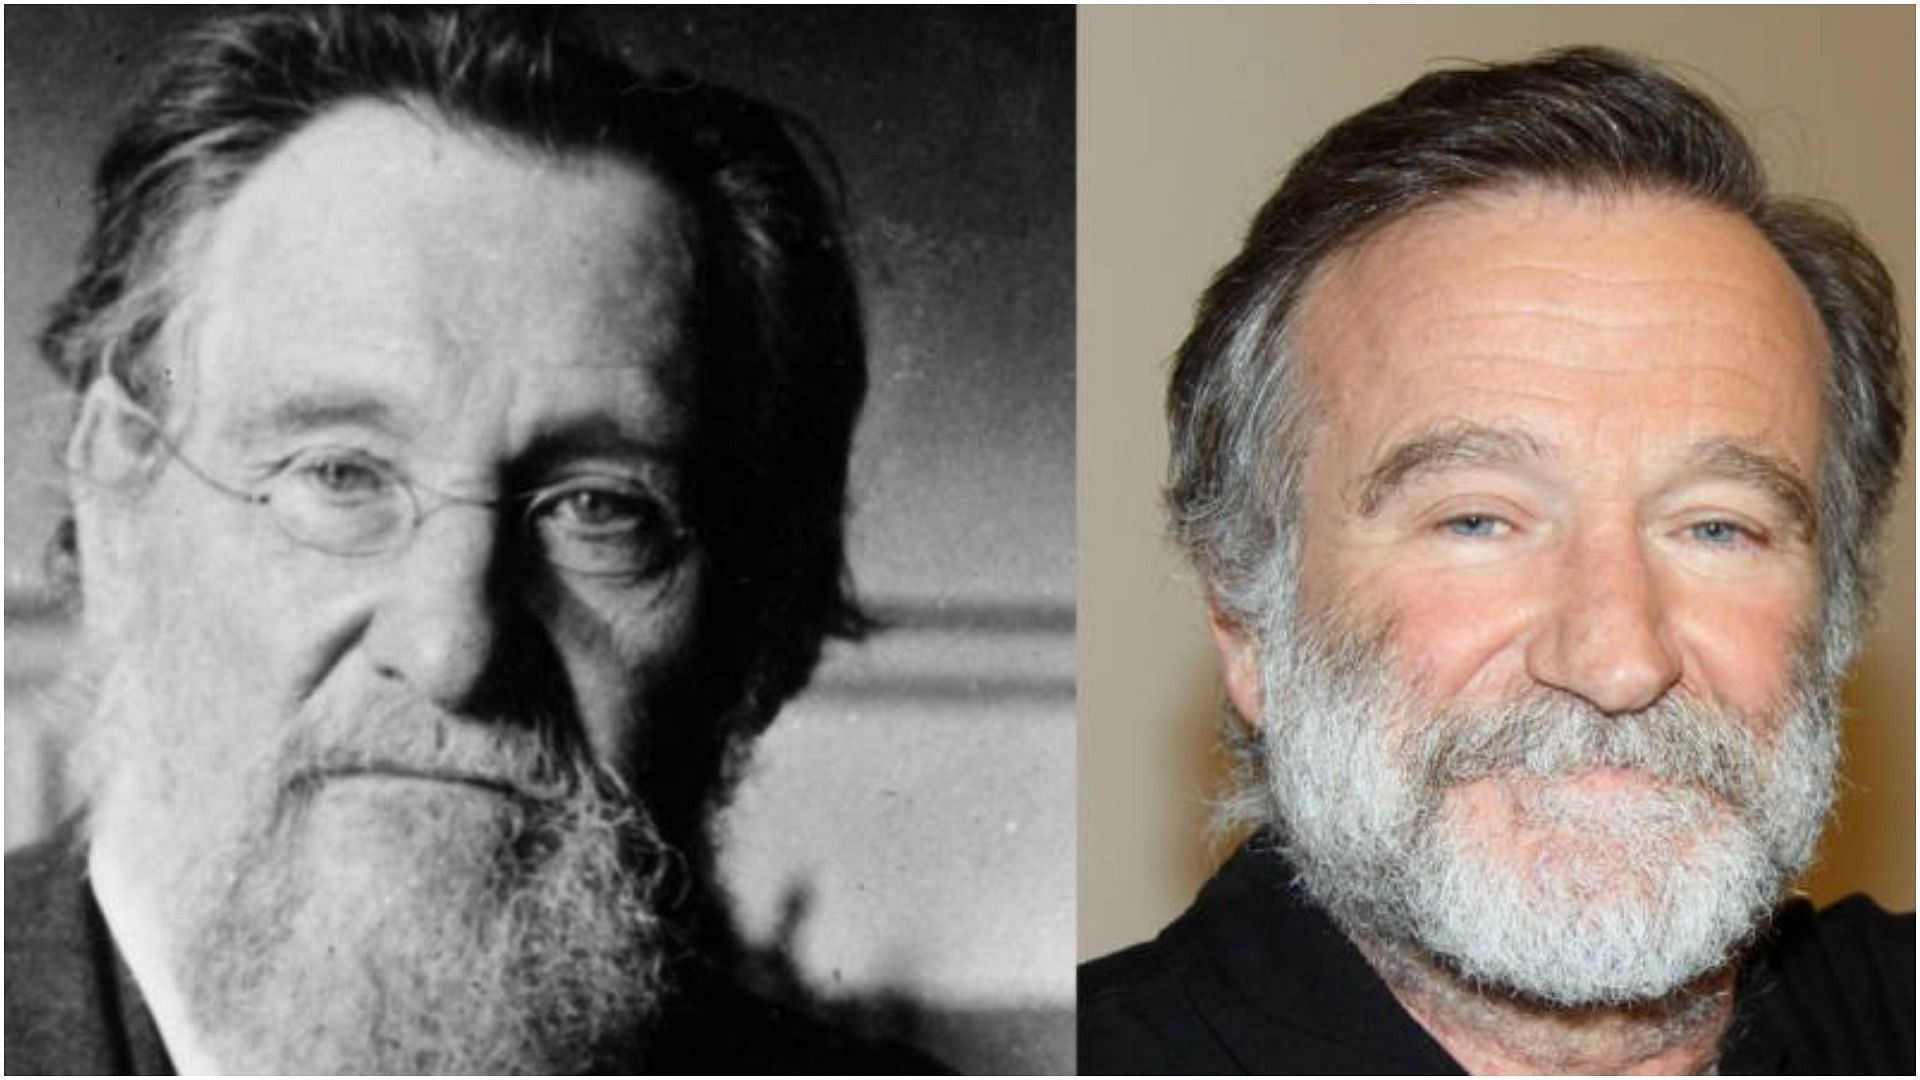 Robin Williams and his lookalike (Images via Getty)